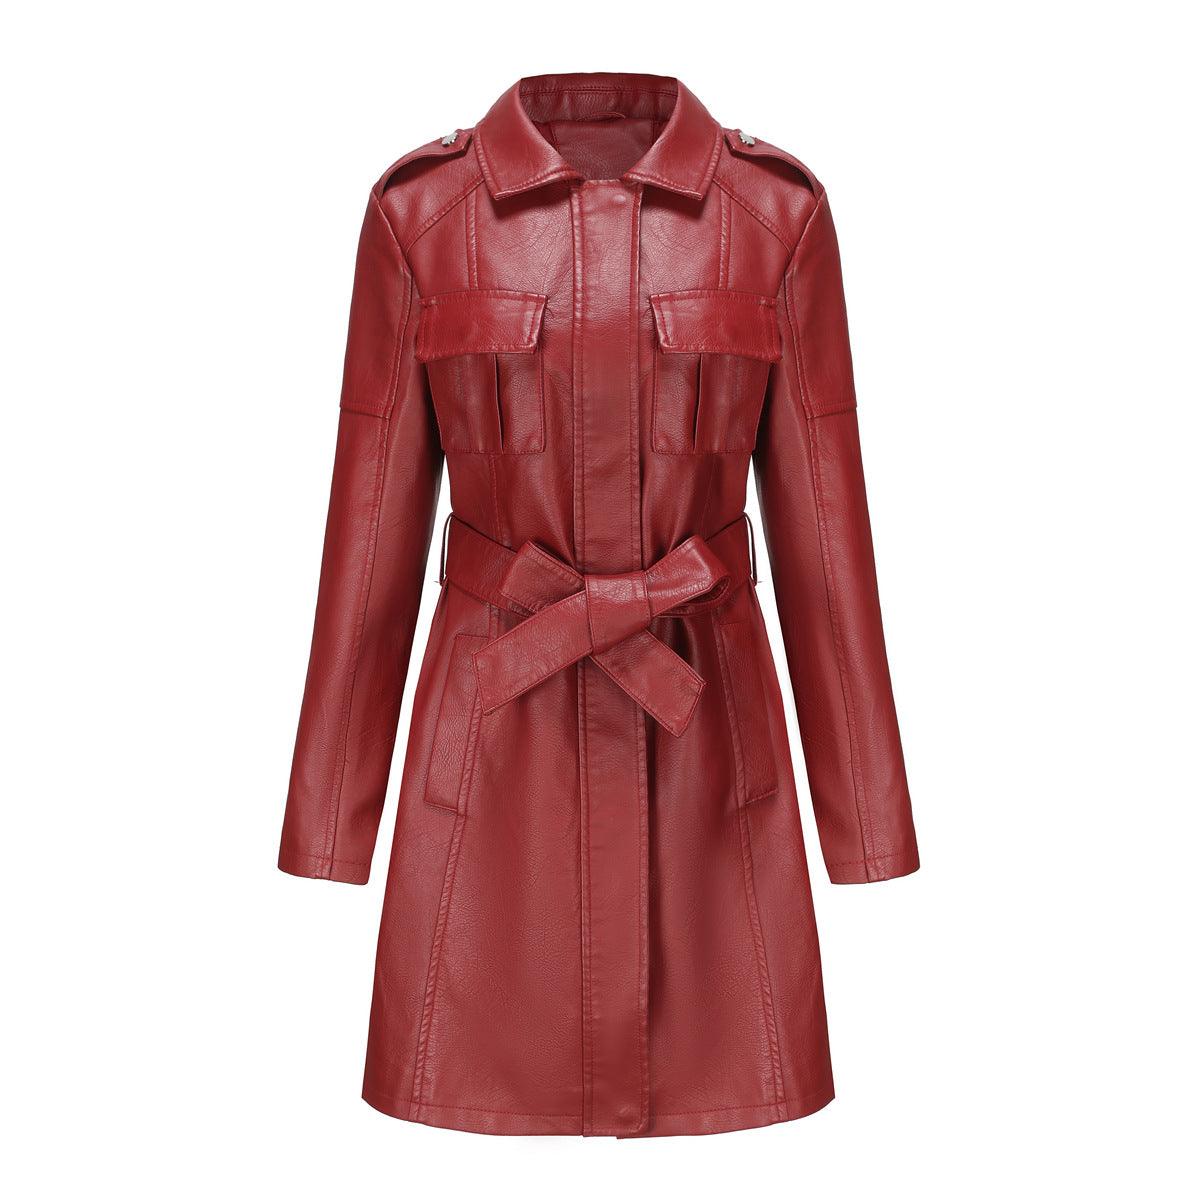 Elegantly Chic: New European and American-Style Mid-Length Leather Coat with Belt - Your-Look